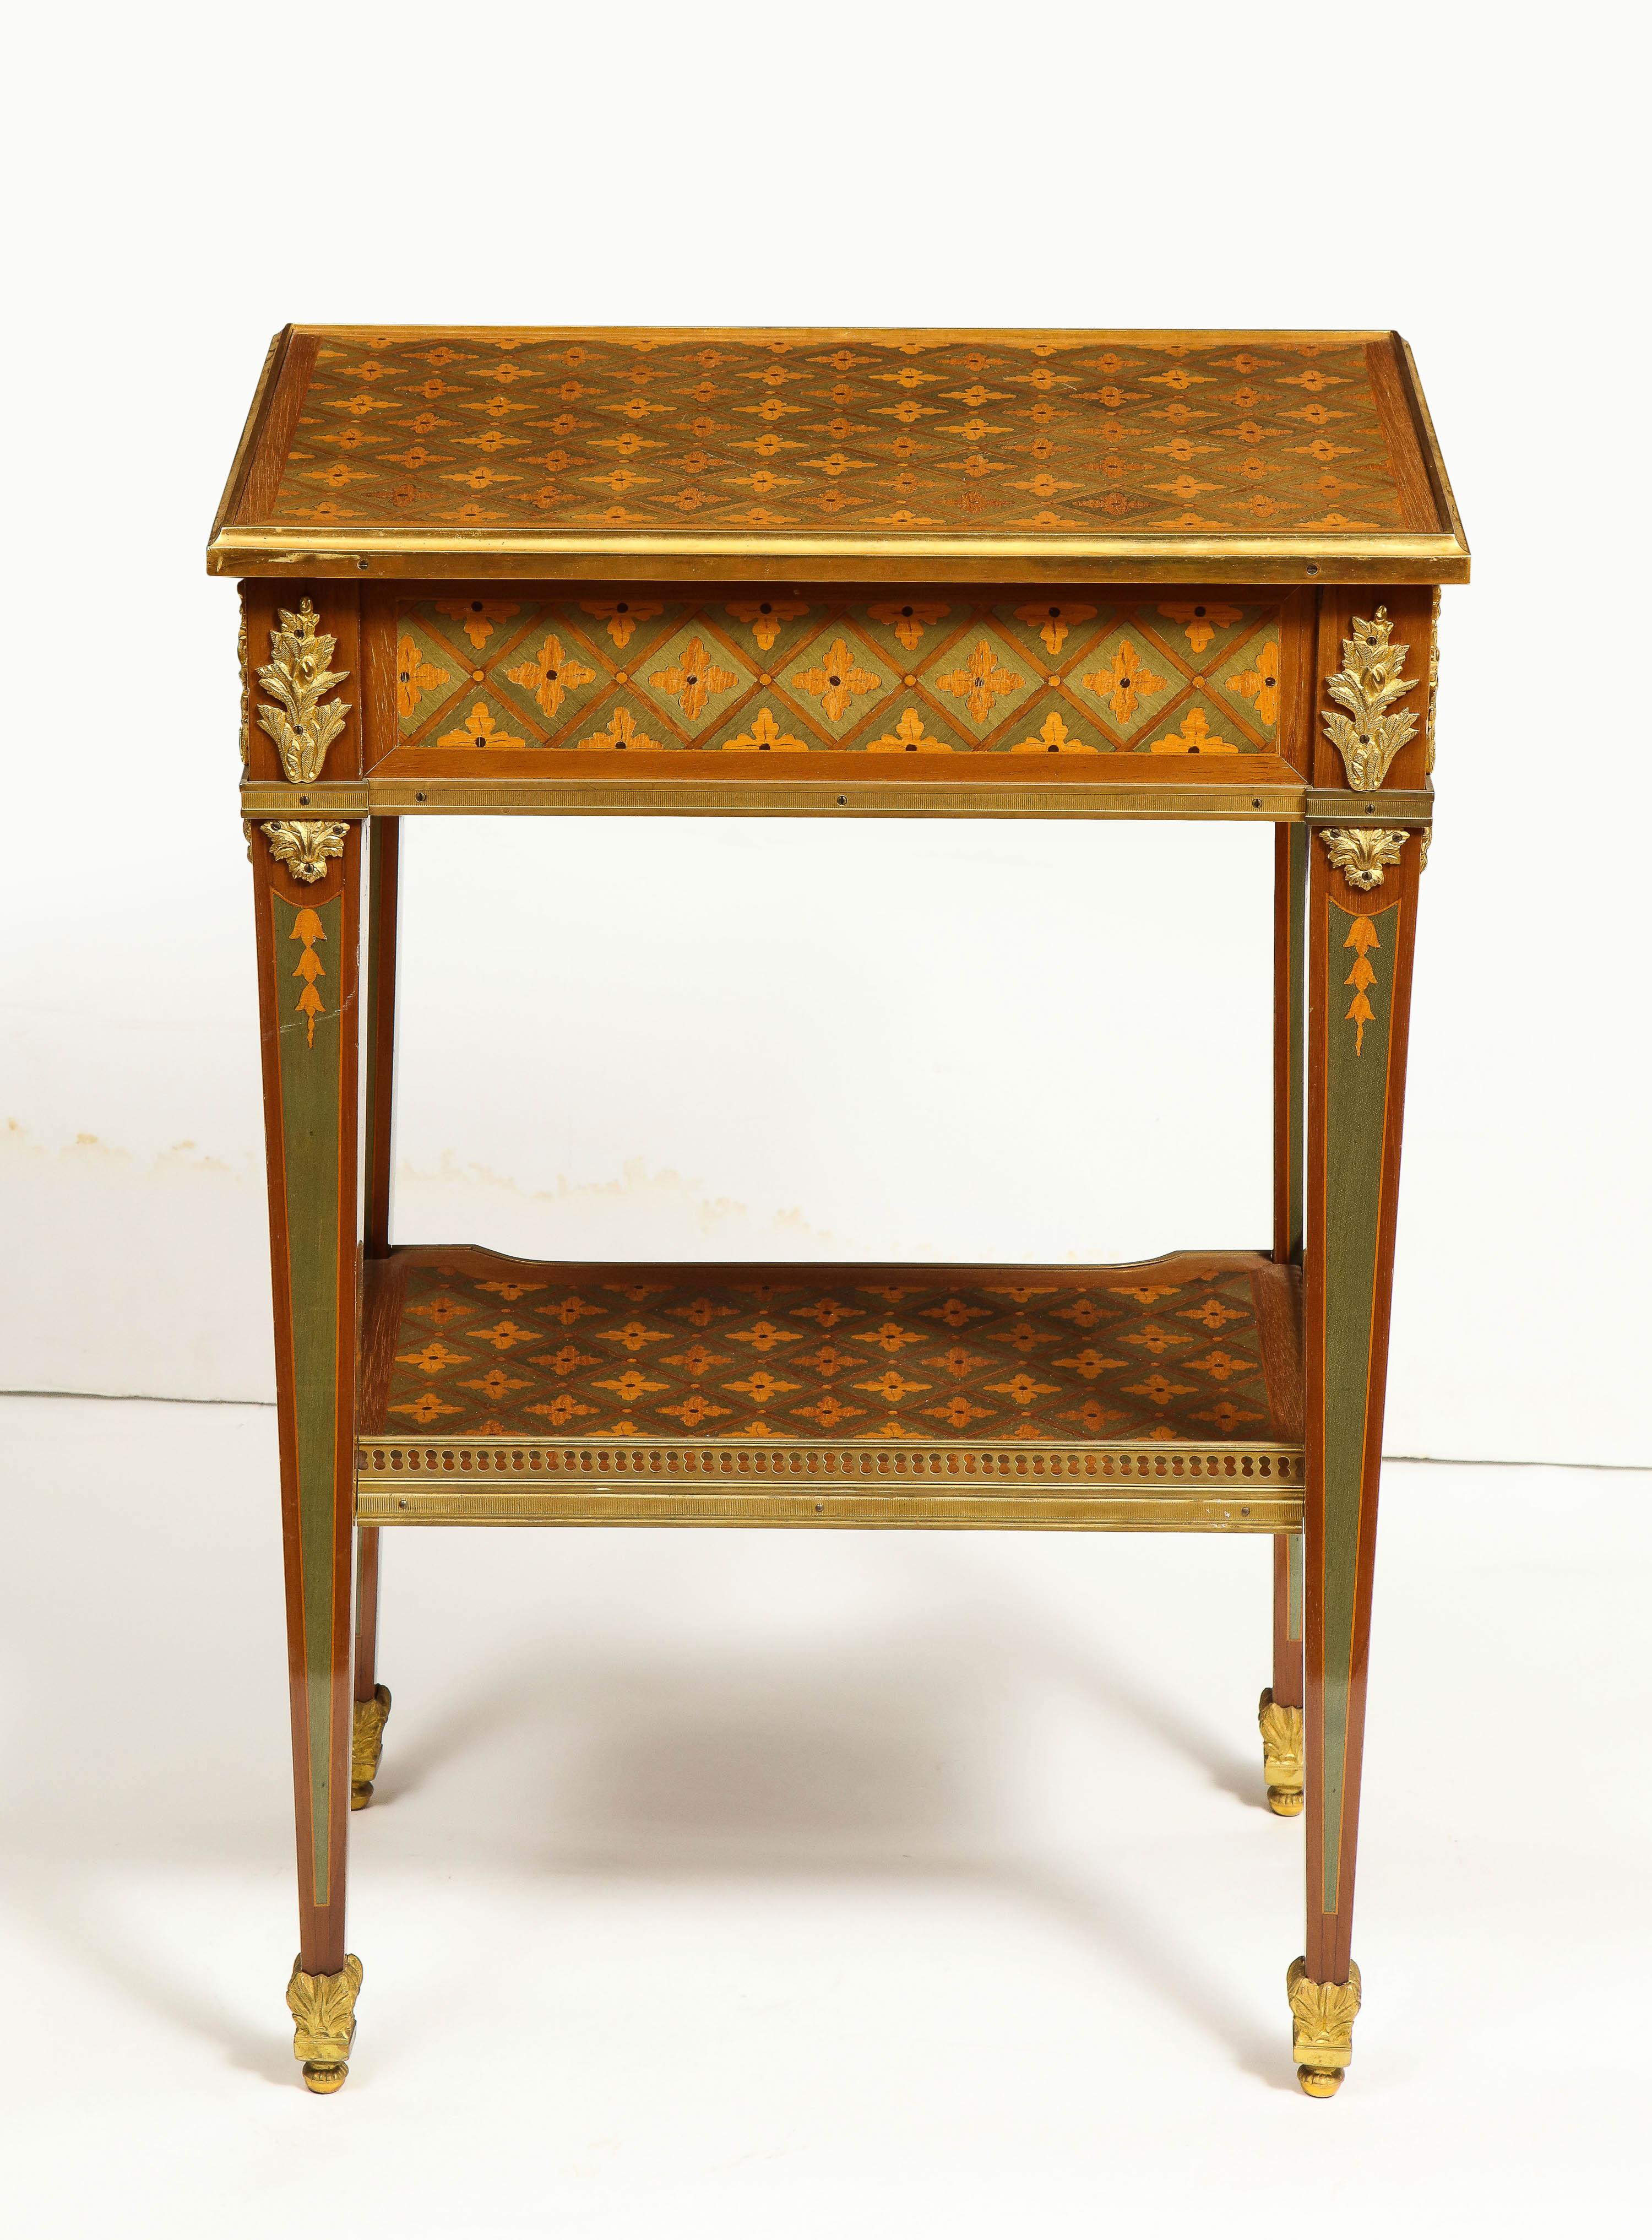 Exceptional Pair of French Ormolu-Mounted Parquetry and Marquetry Side Tables For Sale 13